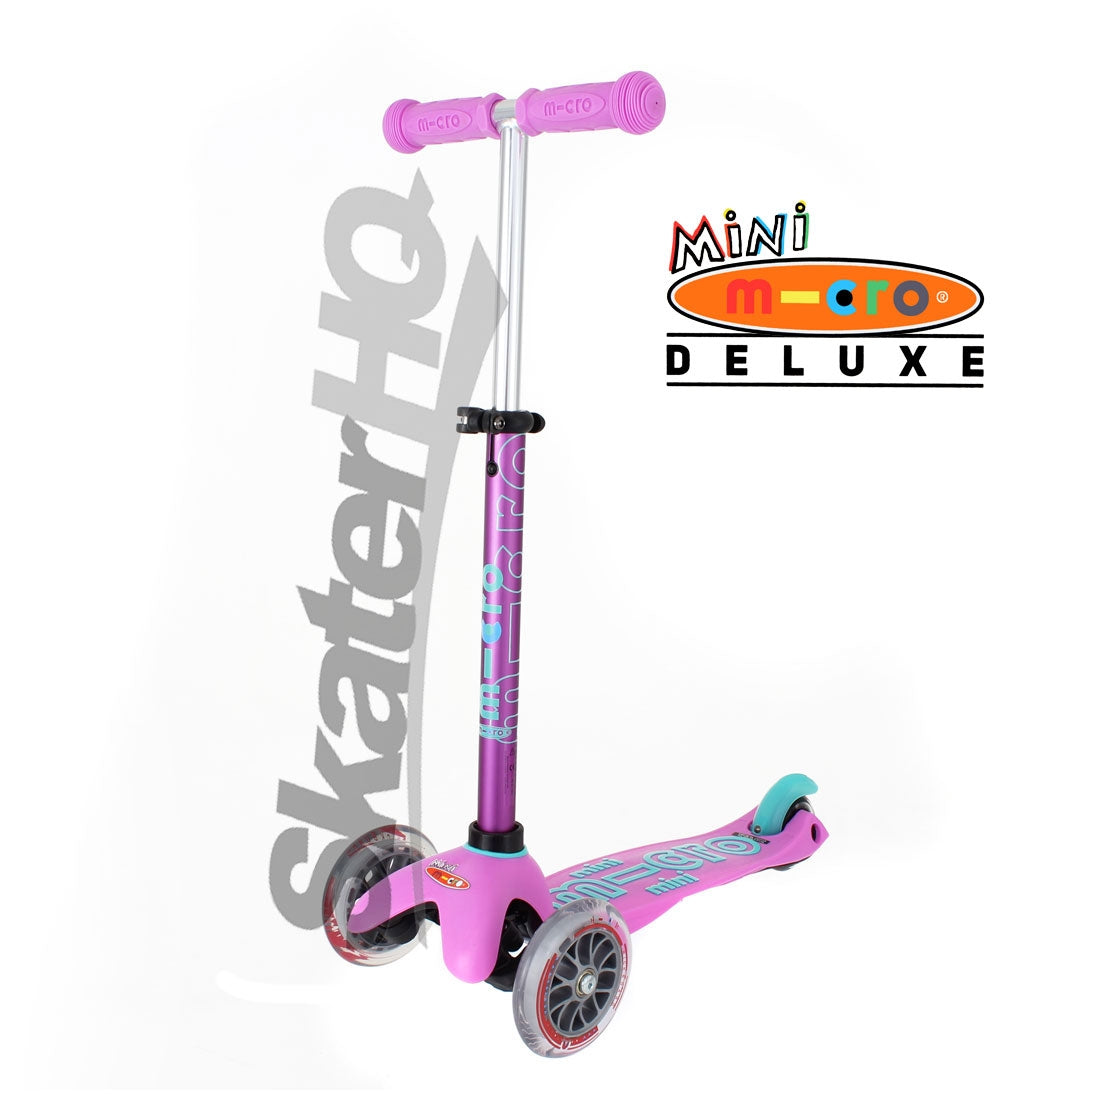 Micro Mini Deluxe Scooter - Lavender Scooter Completes Rec